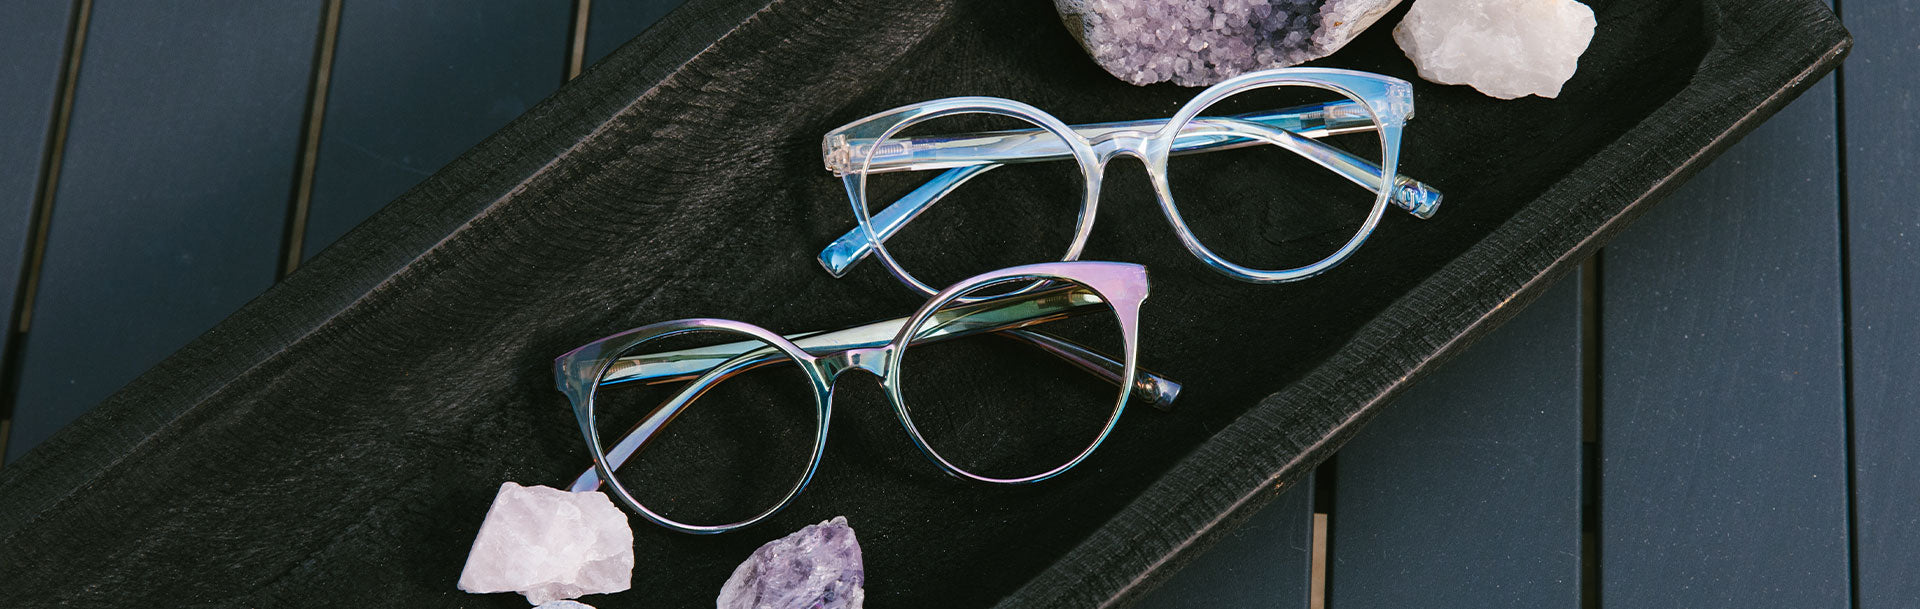 Can You Wear Reading Glasses All Day?